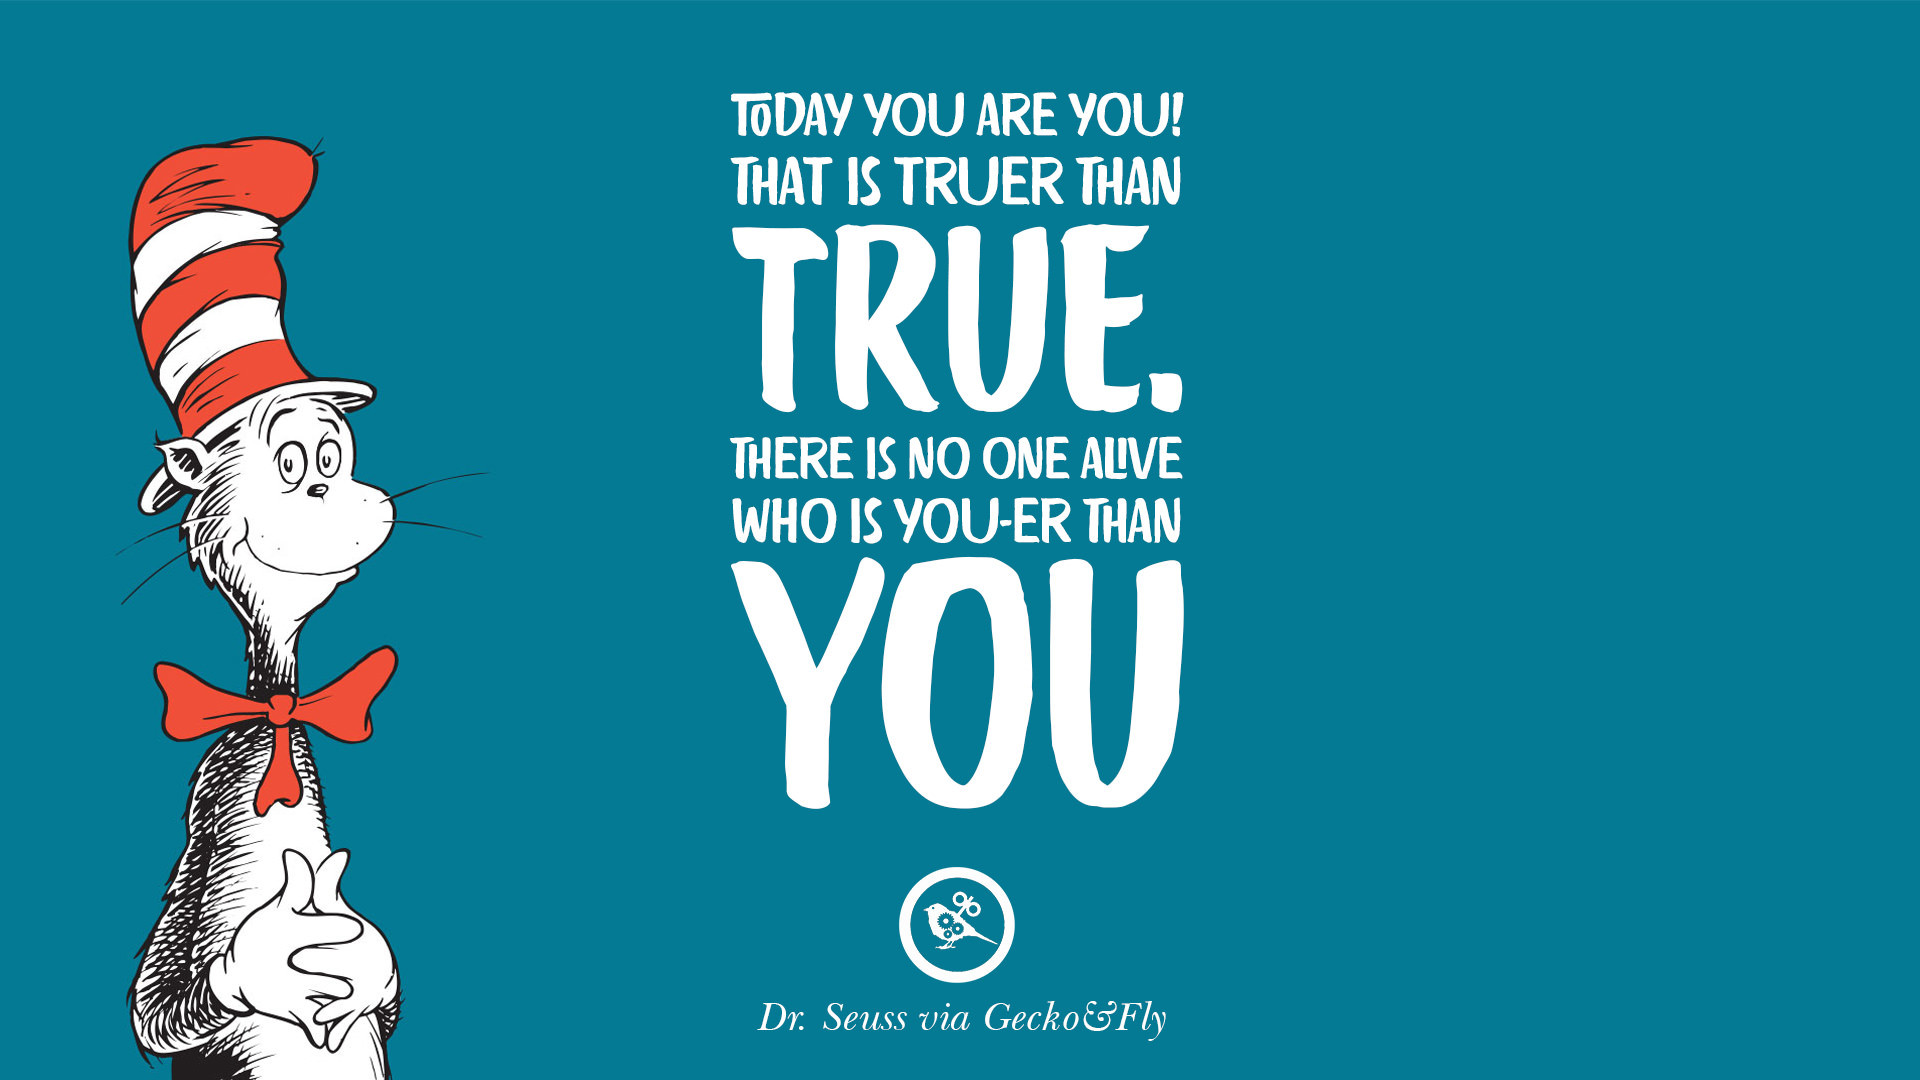 Dr Seuss Quotes Love
 10 Beautiful Dr Seuss Quotes Love And Life